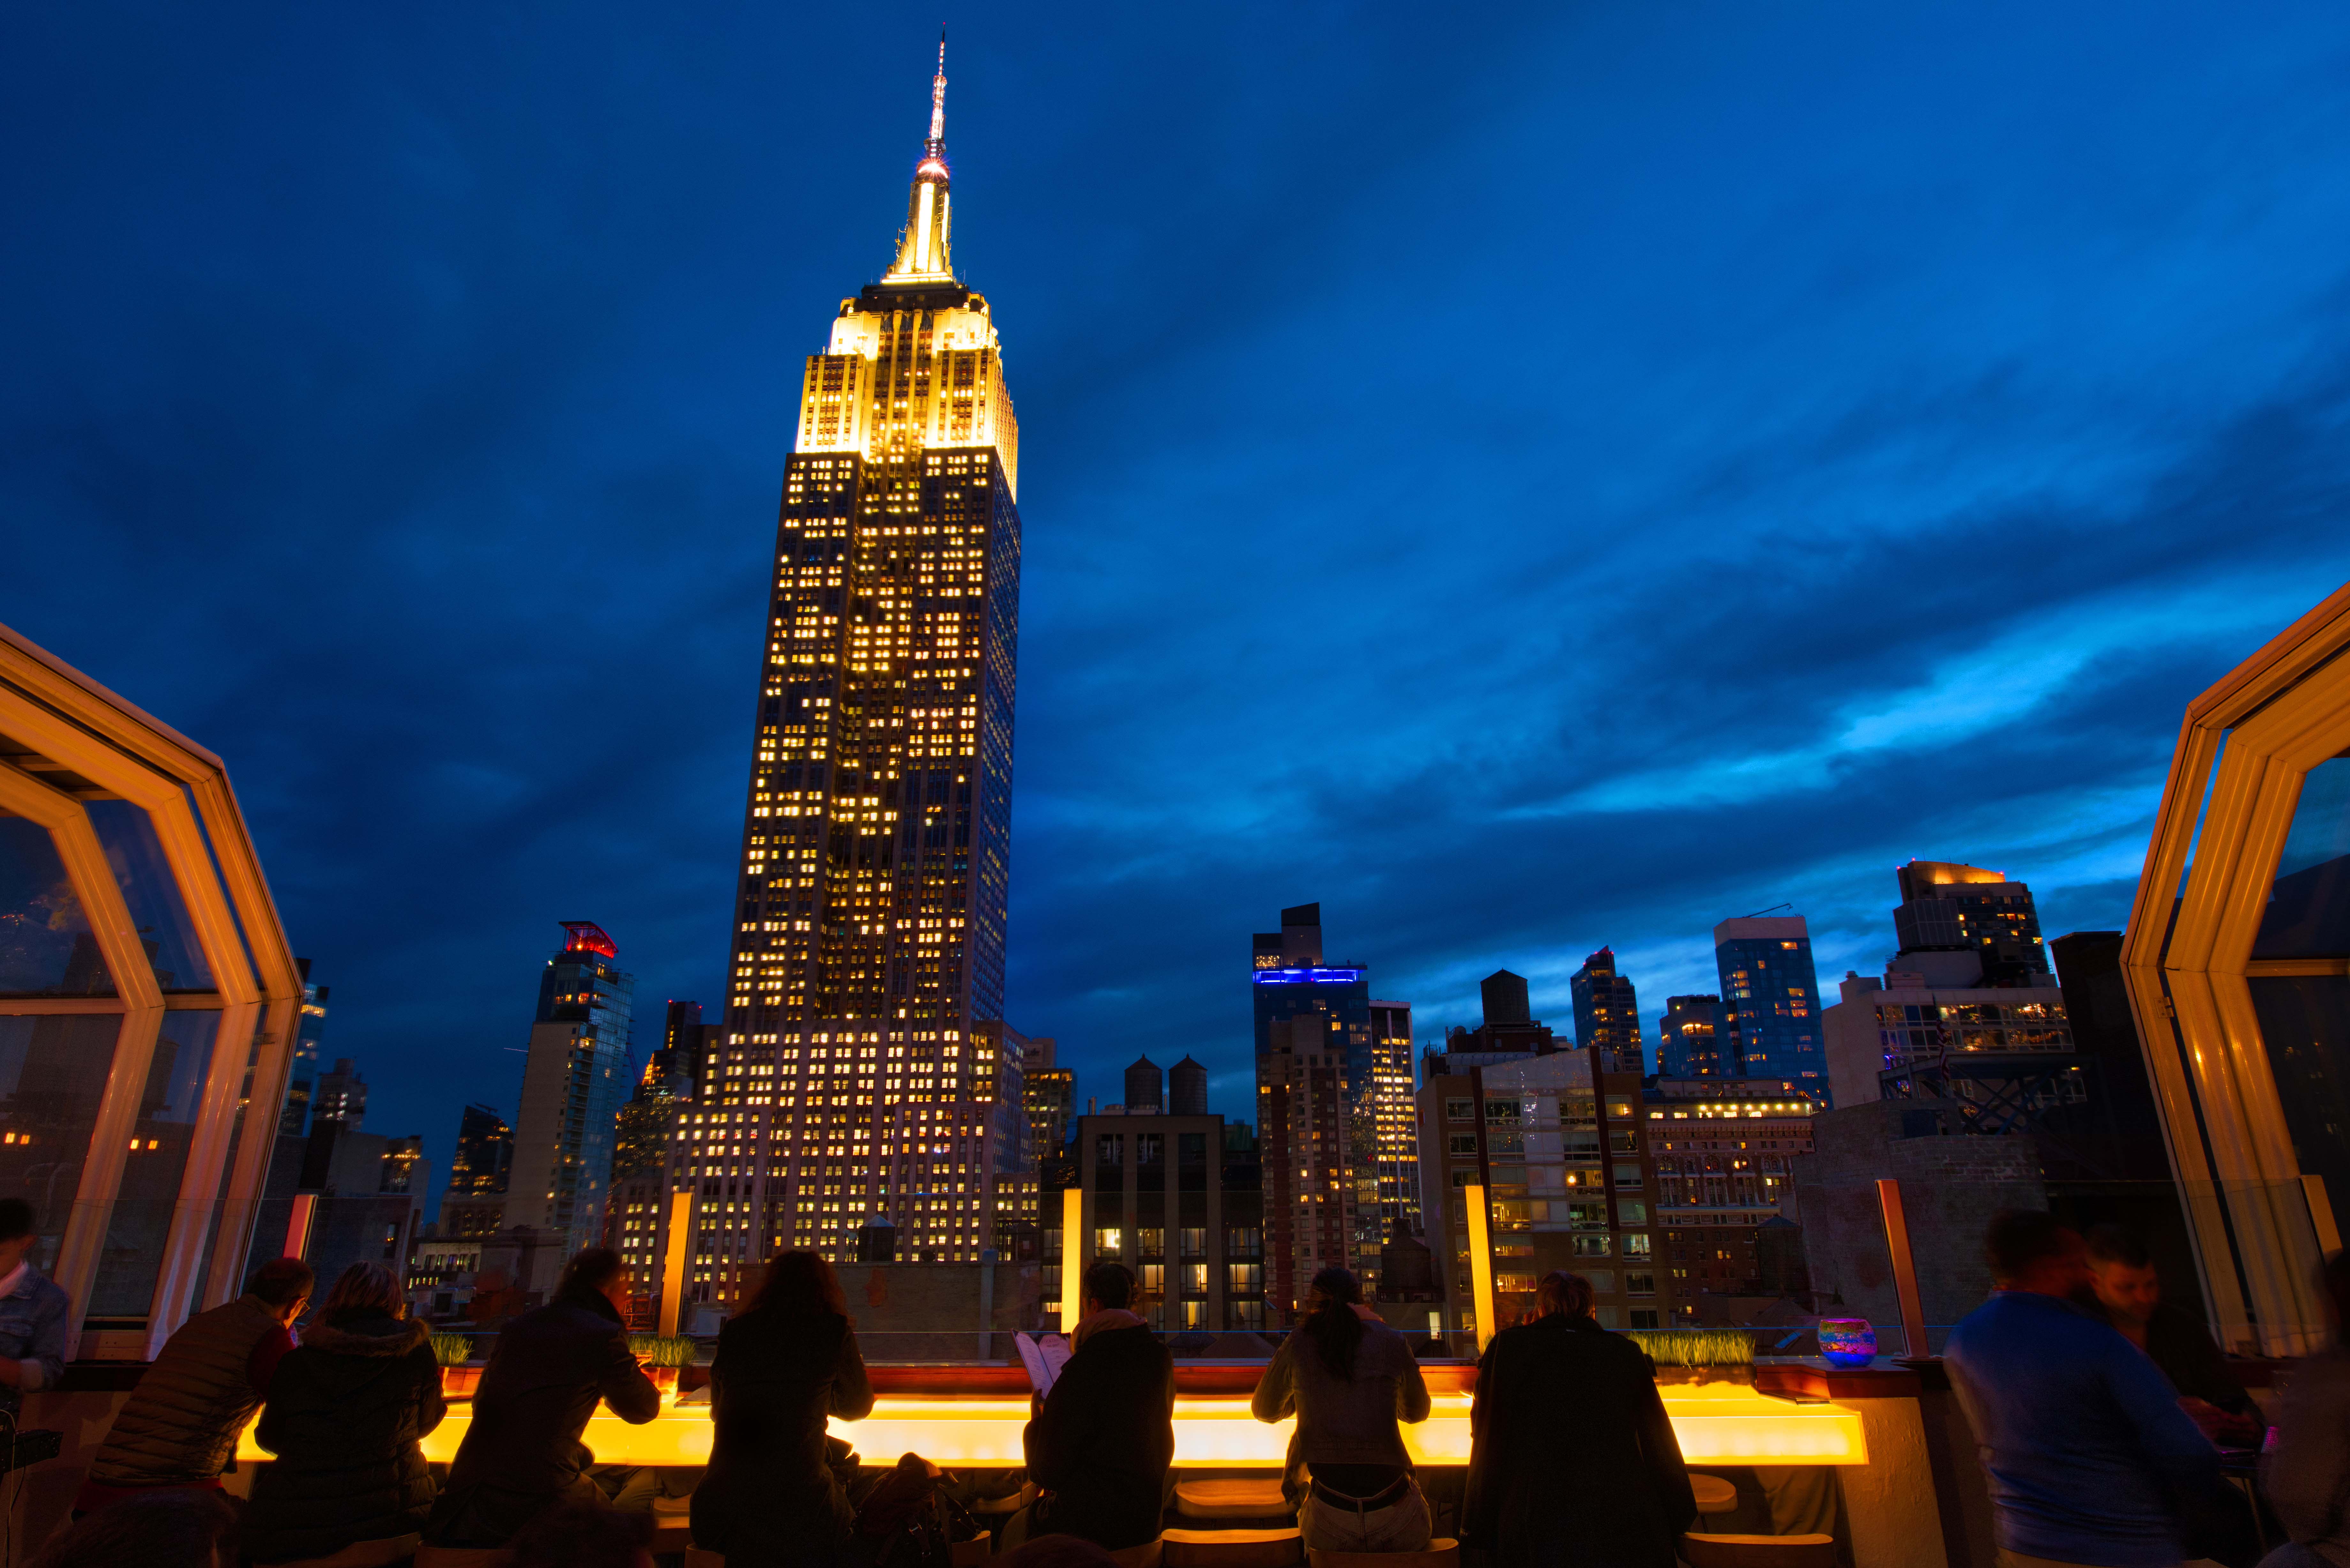 The Empire State Building in New York City lit up at night